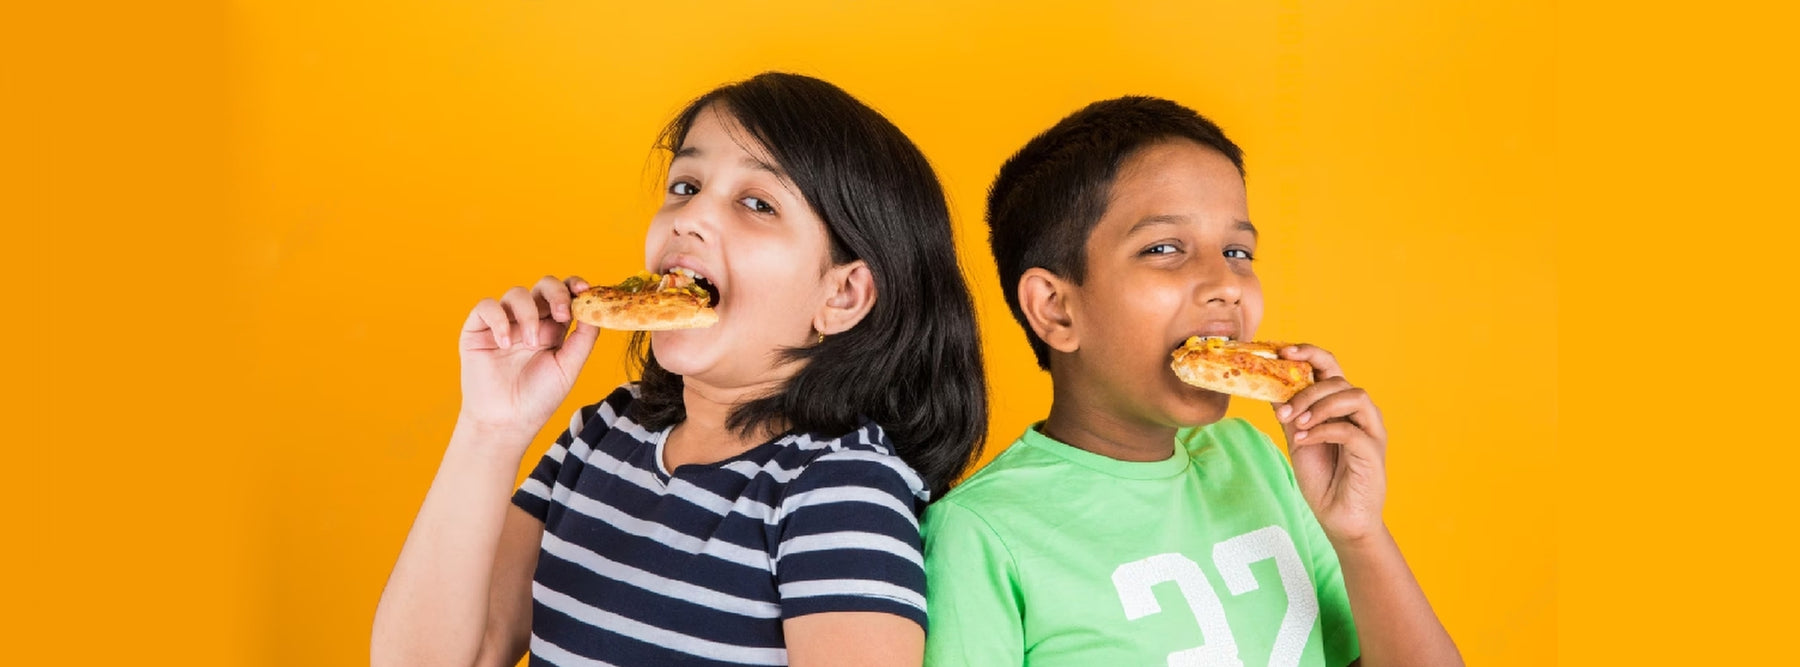 Nutrition for children: suggestions for a balanced diet